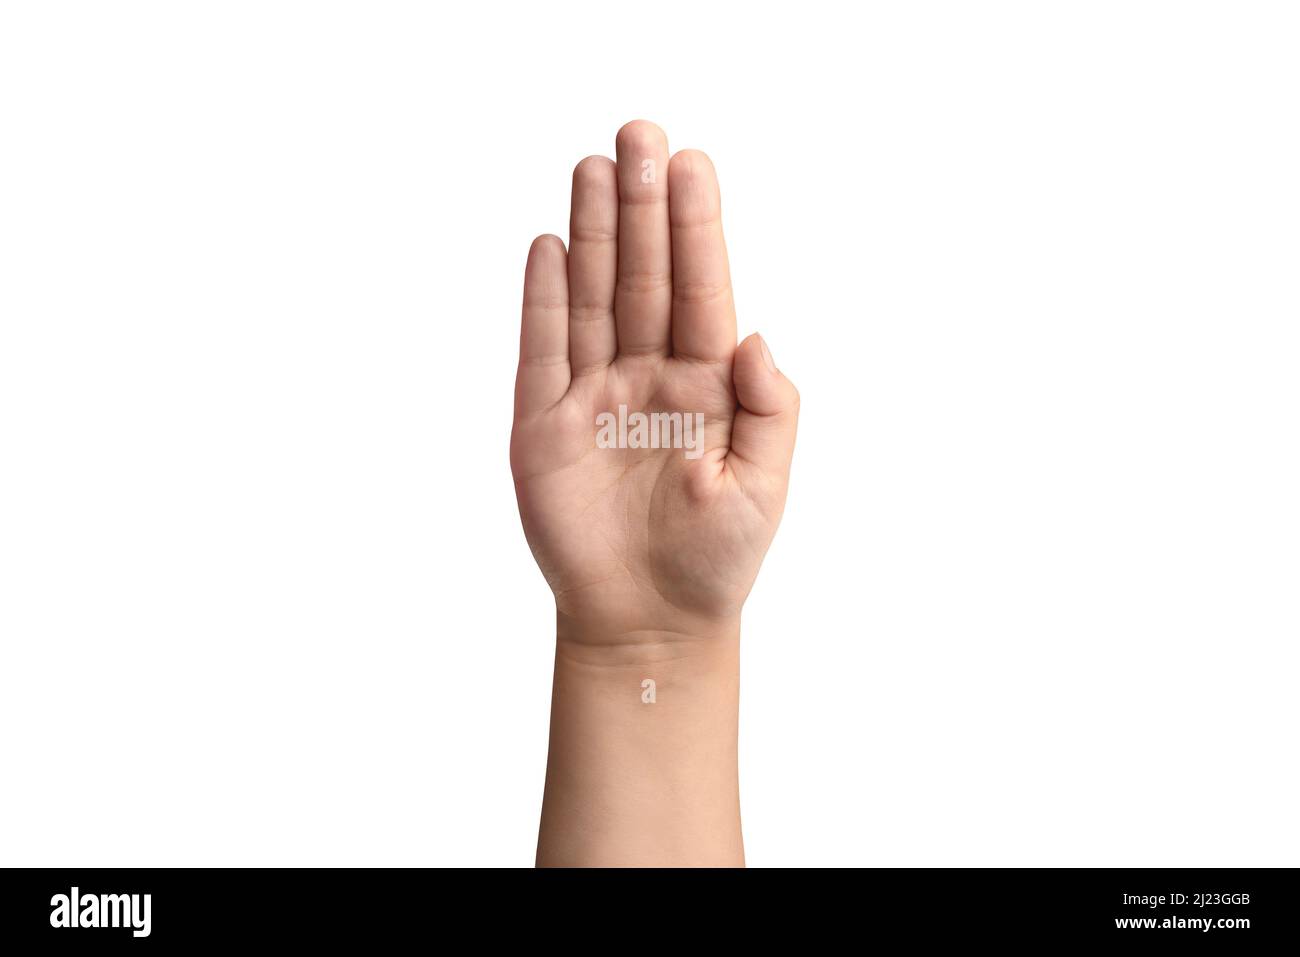 Children's hand on a white background. The girl's palm is pointing up. Stock Photo